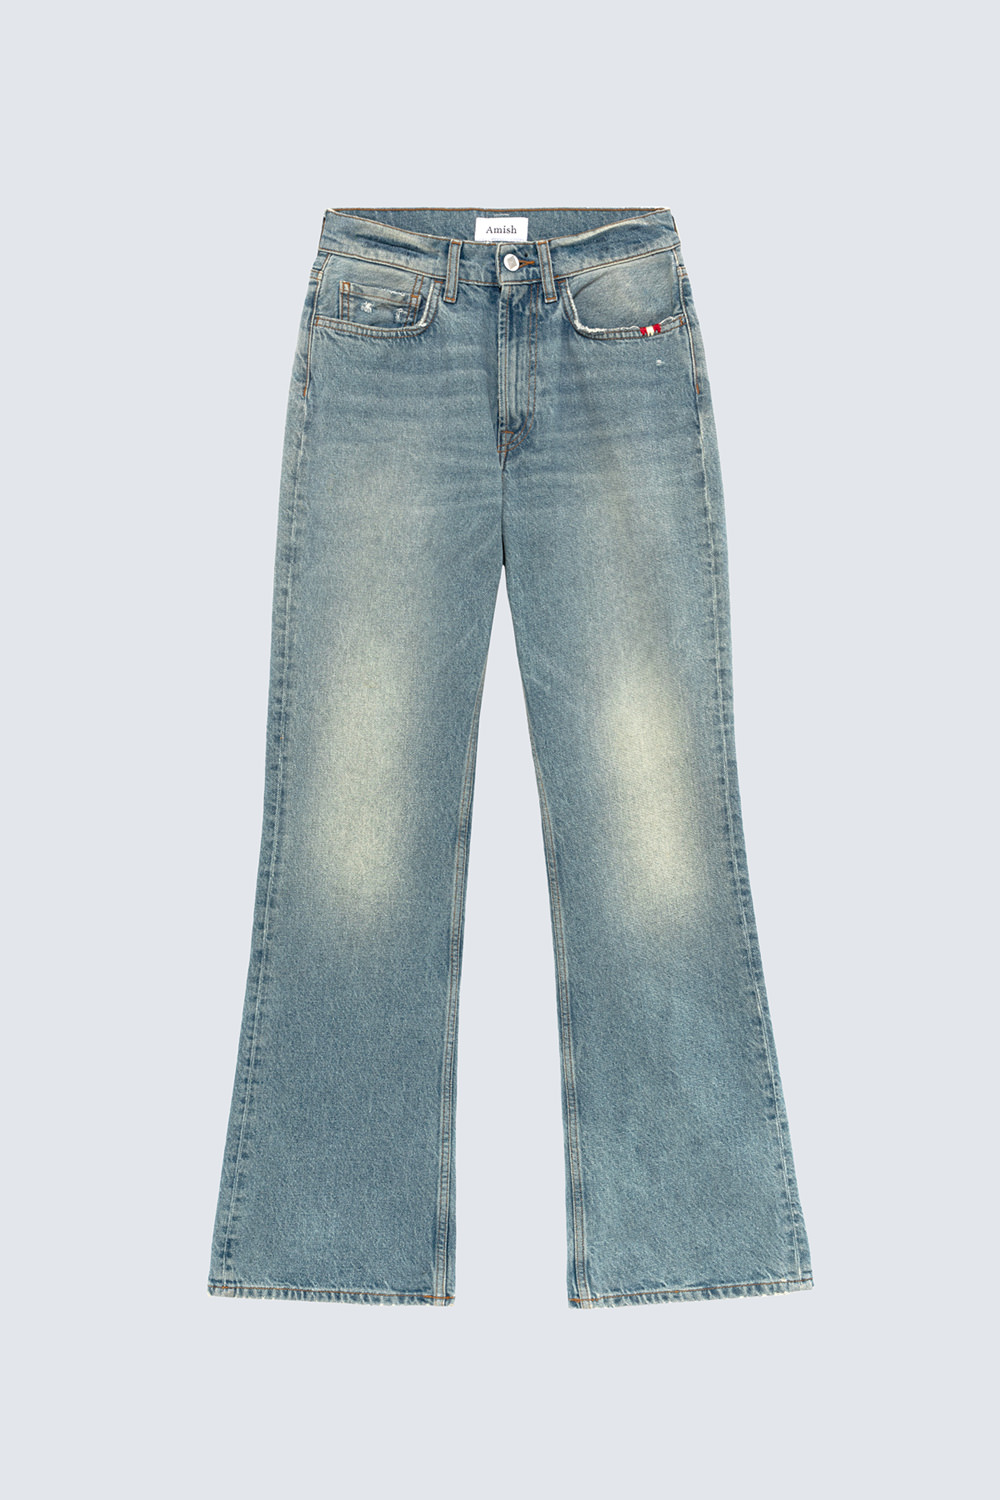 AMISH: REAL VINTAGE KENDALL JEANS